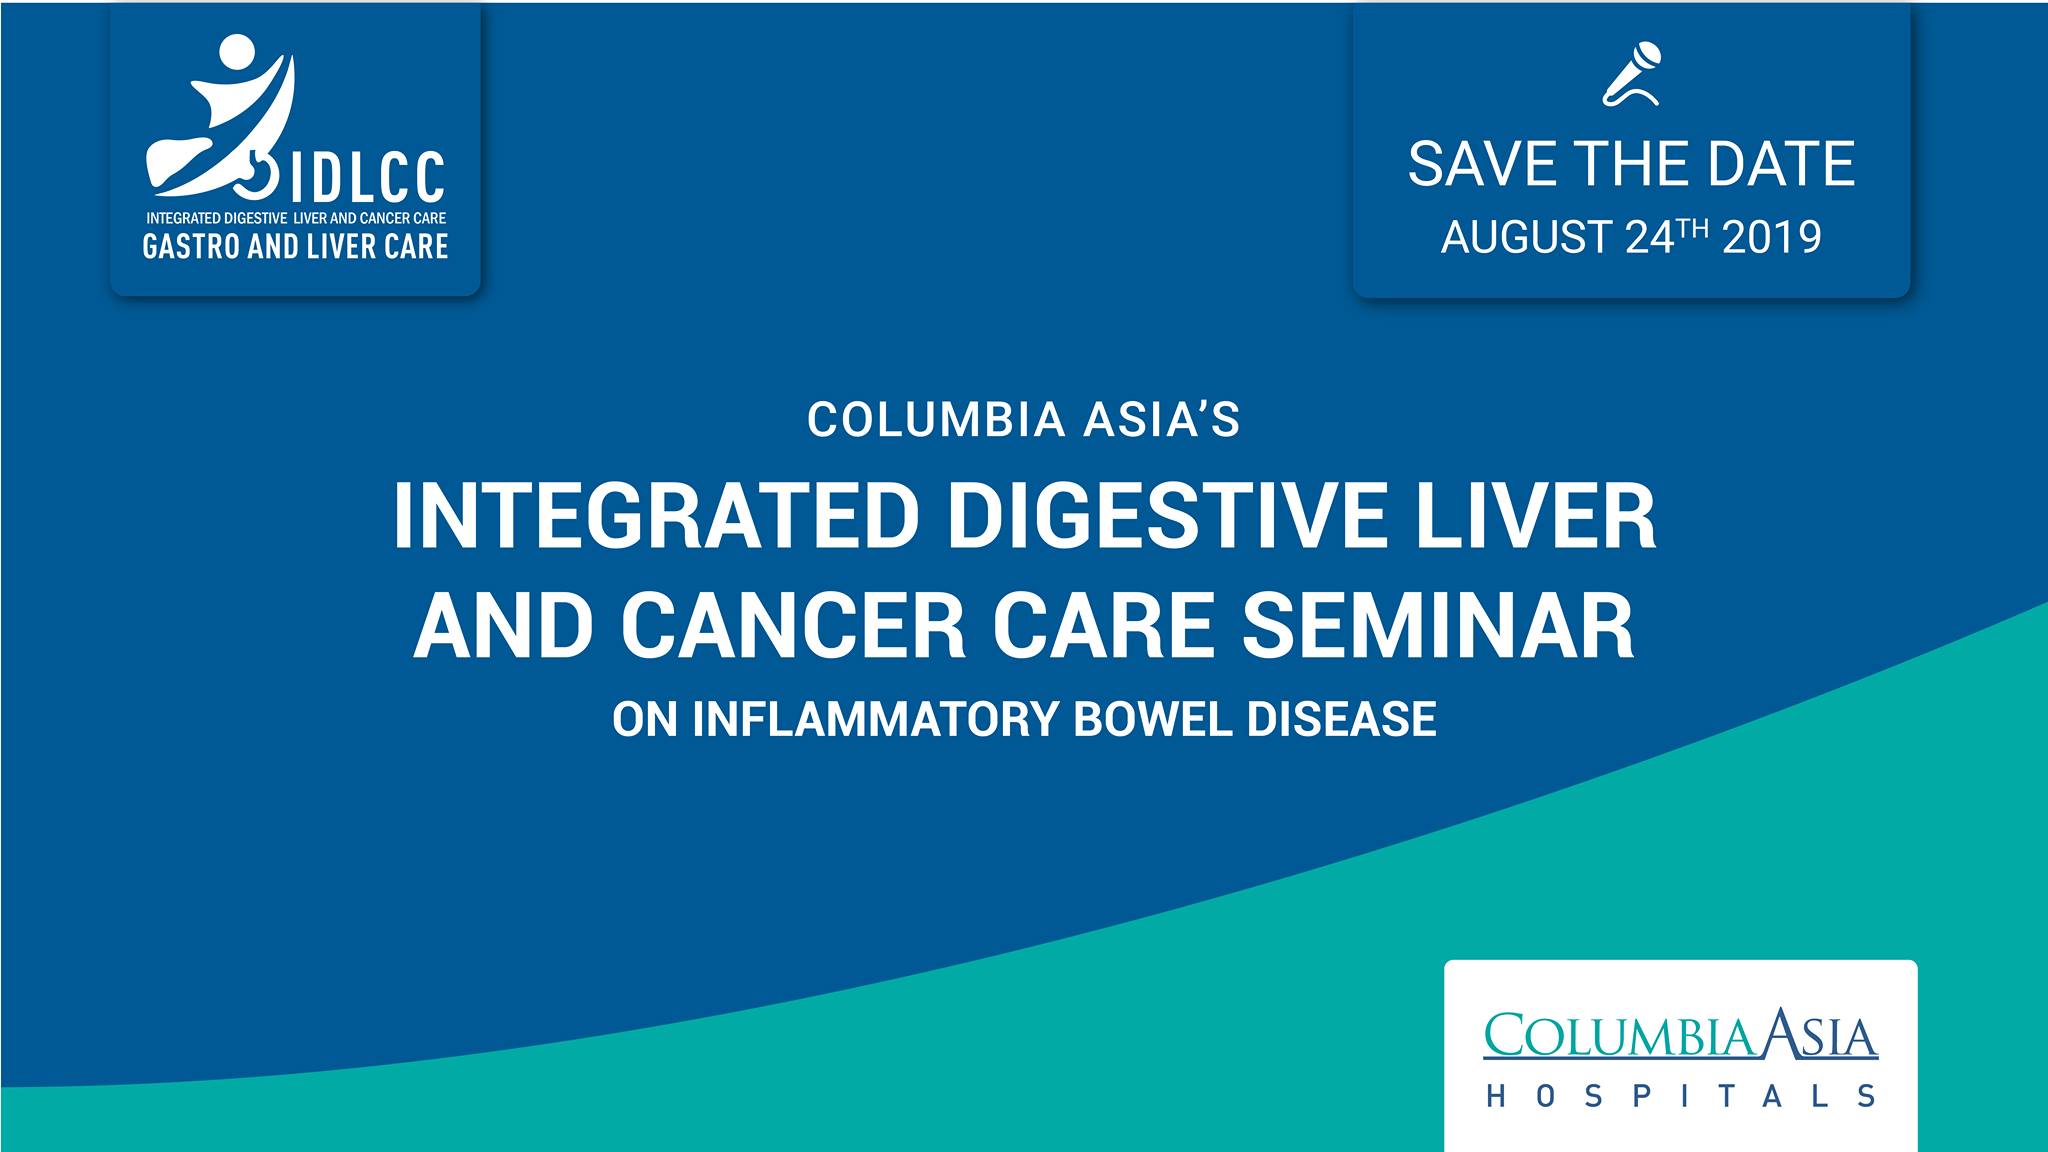 Columbia Asia's Integrated Digestive & Liver Cancer Care Seminar